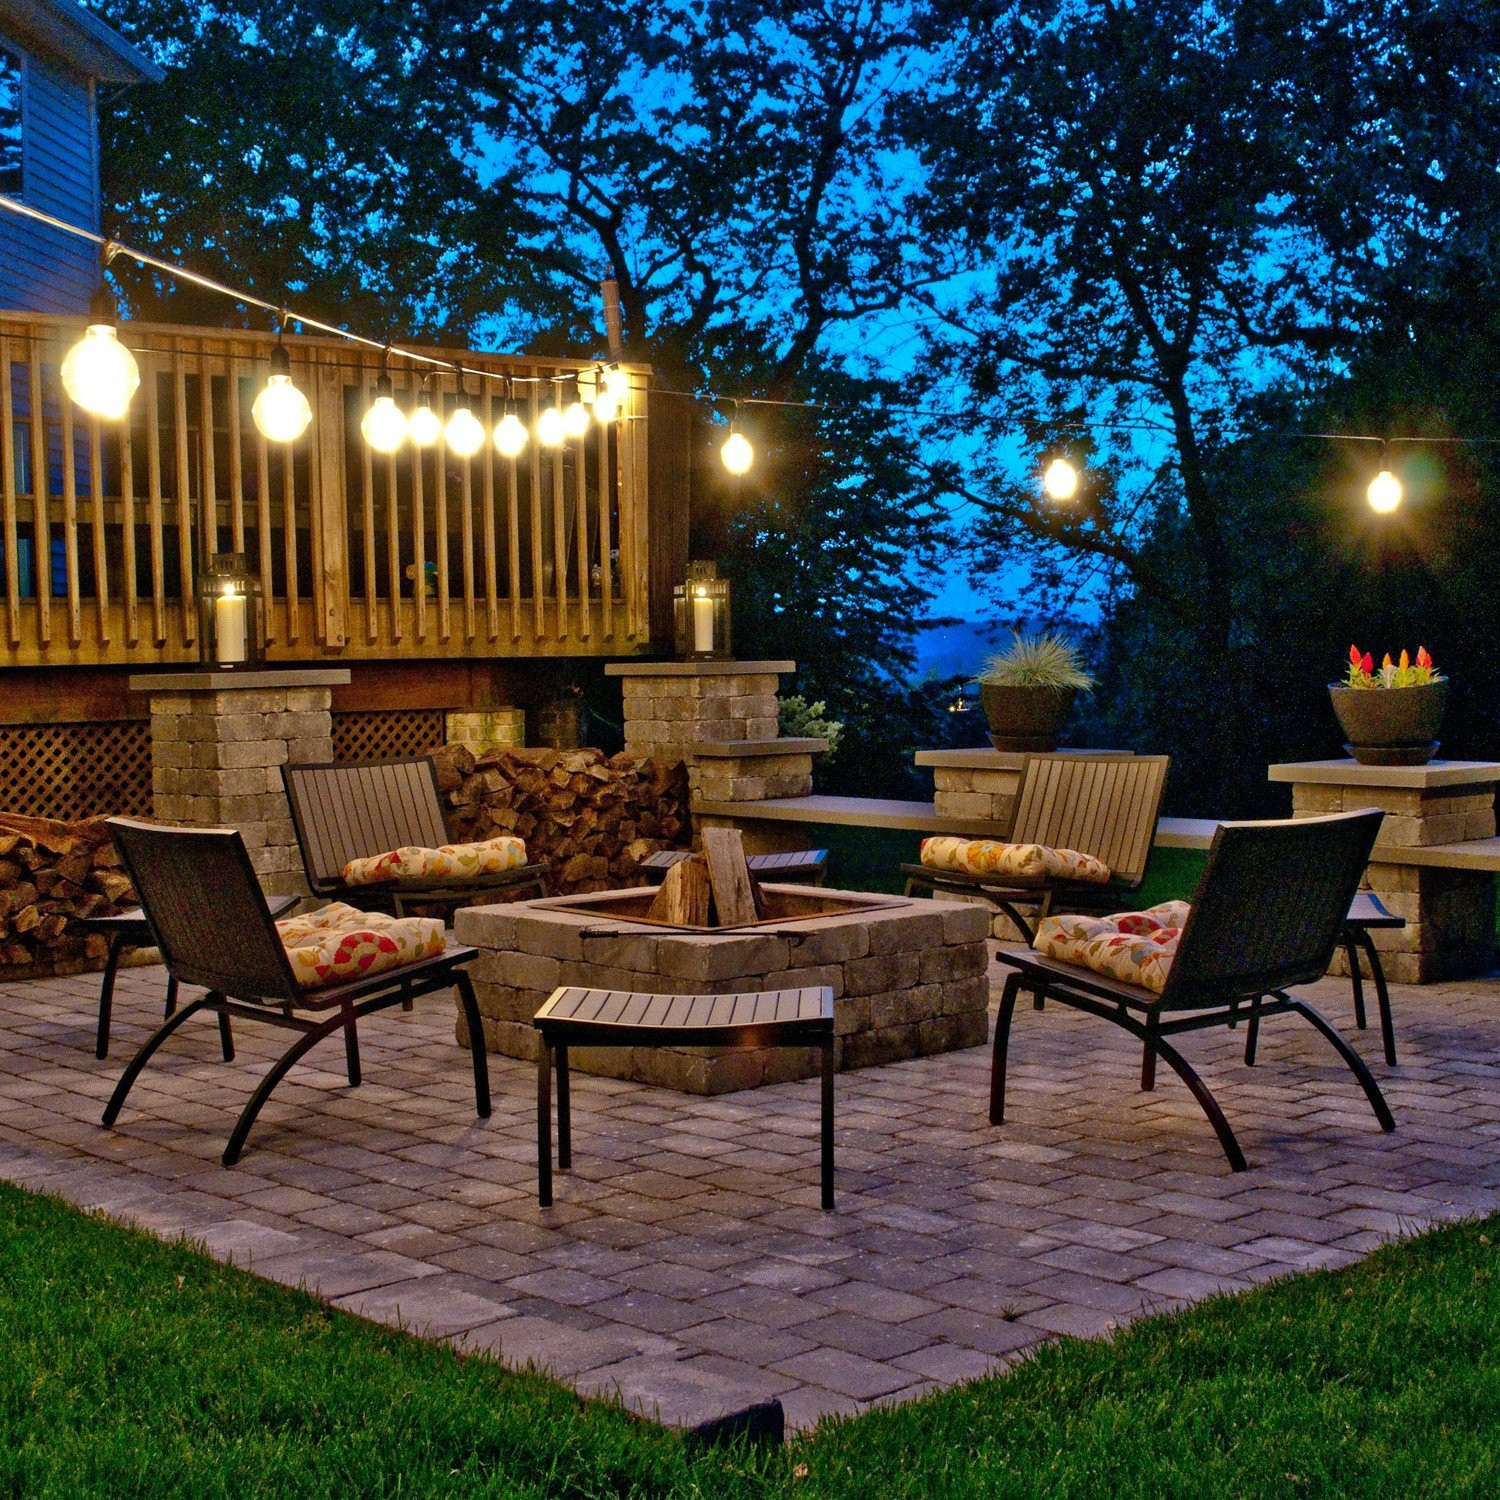 Backyard String Lighting Ideas
 Top Outdoor String Lights for the Holidays Teak Patio